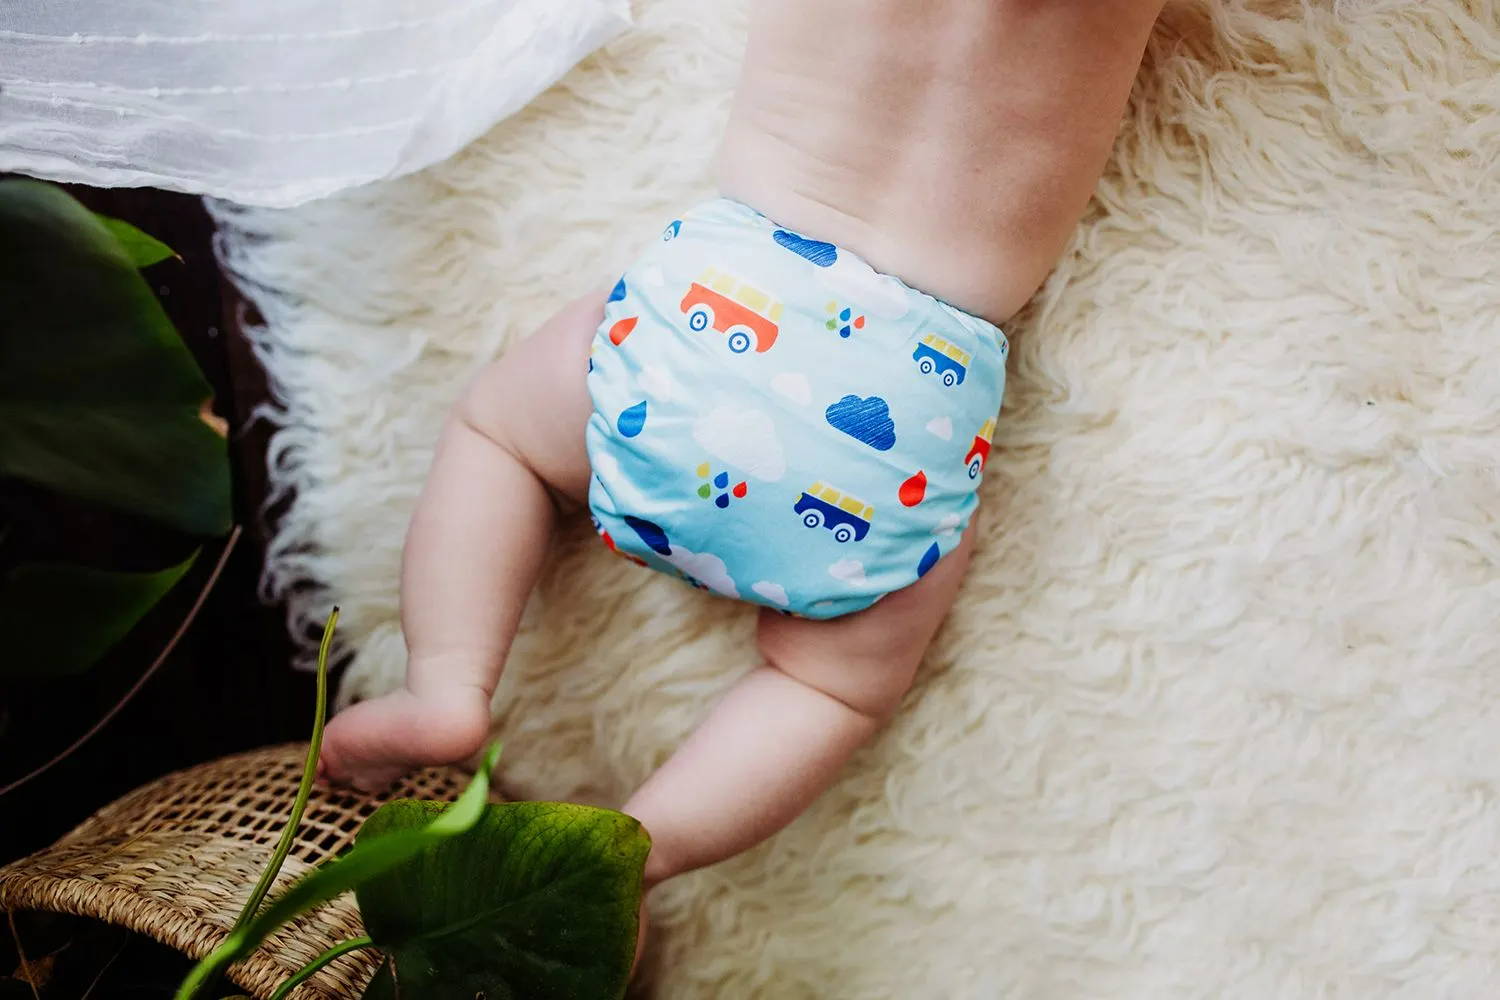 Dreaming baby wearing the planes and trains print from Simple Being Cloth Diapers. Looking simply comfortable in his reusable diapers.